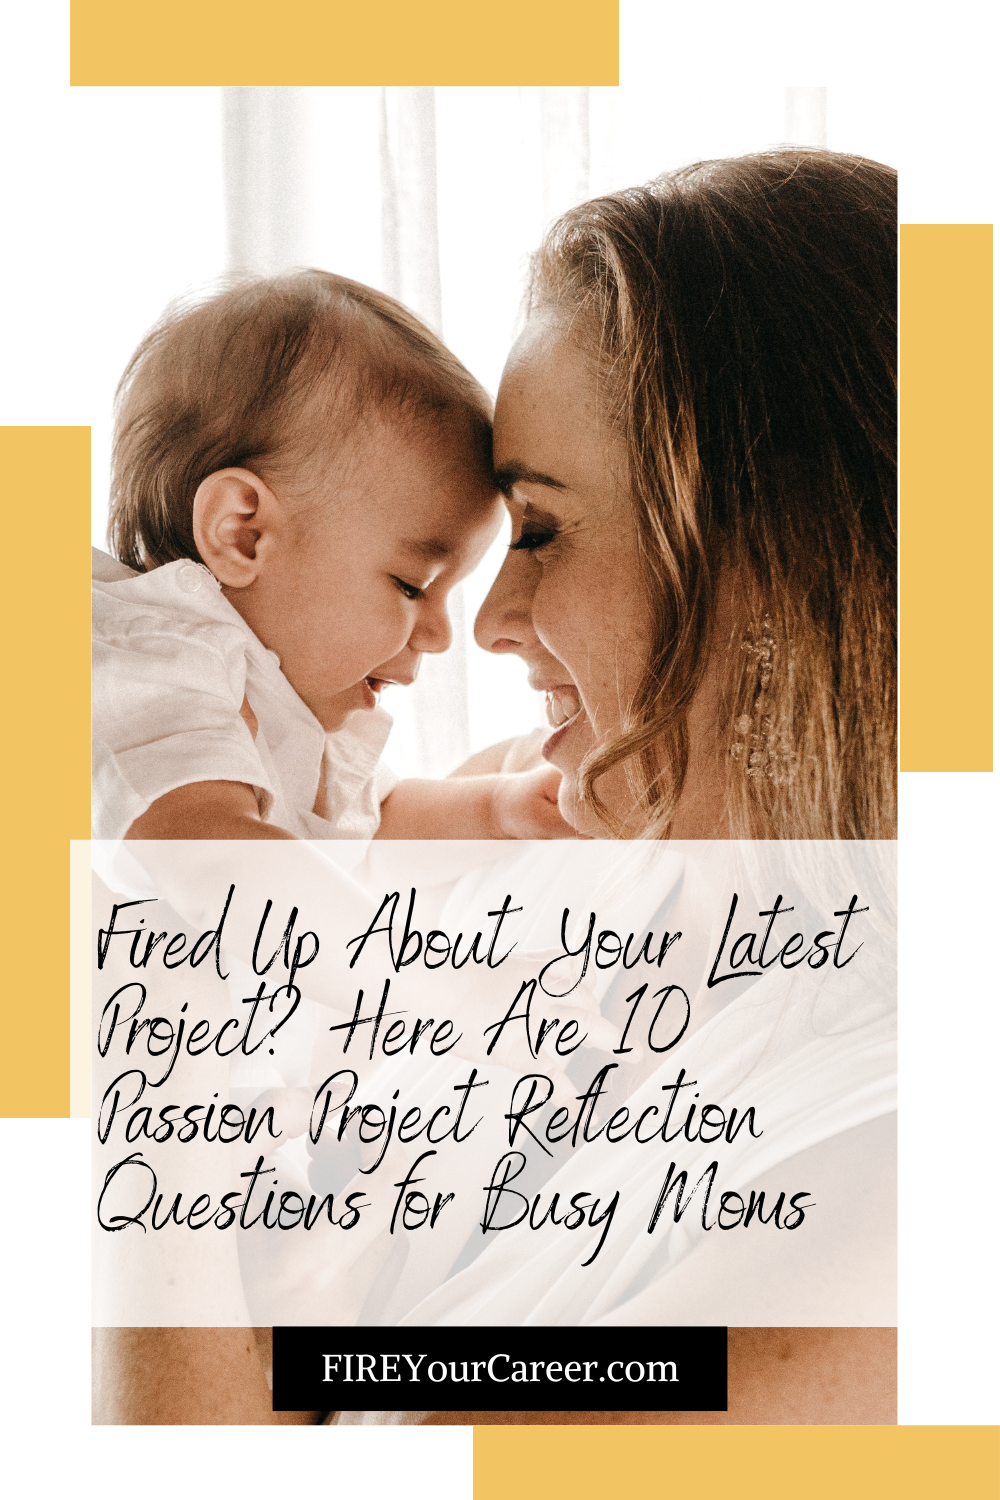 Fired Up About Your Latest Project Here Are 10 Passion Project Reflection Questions for Busy Moms Pinterest